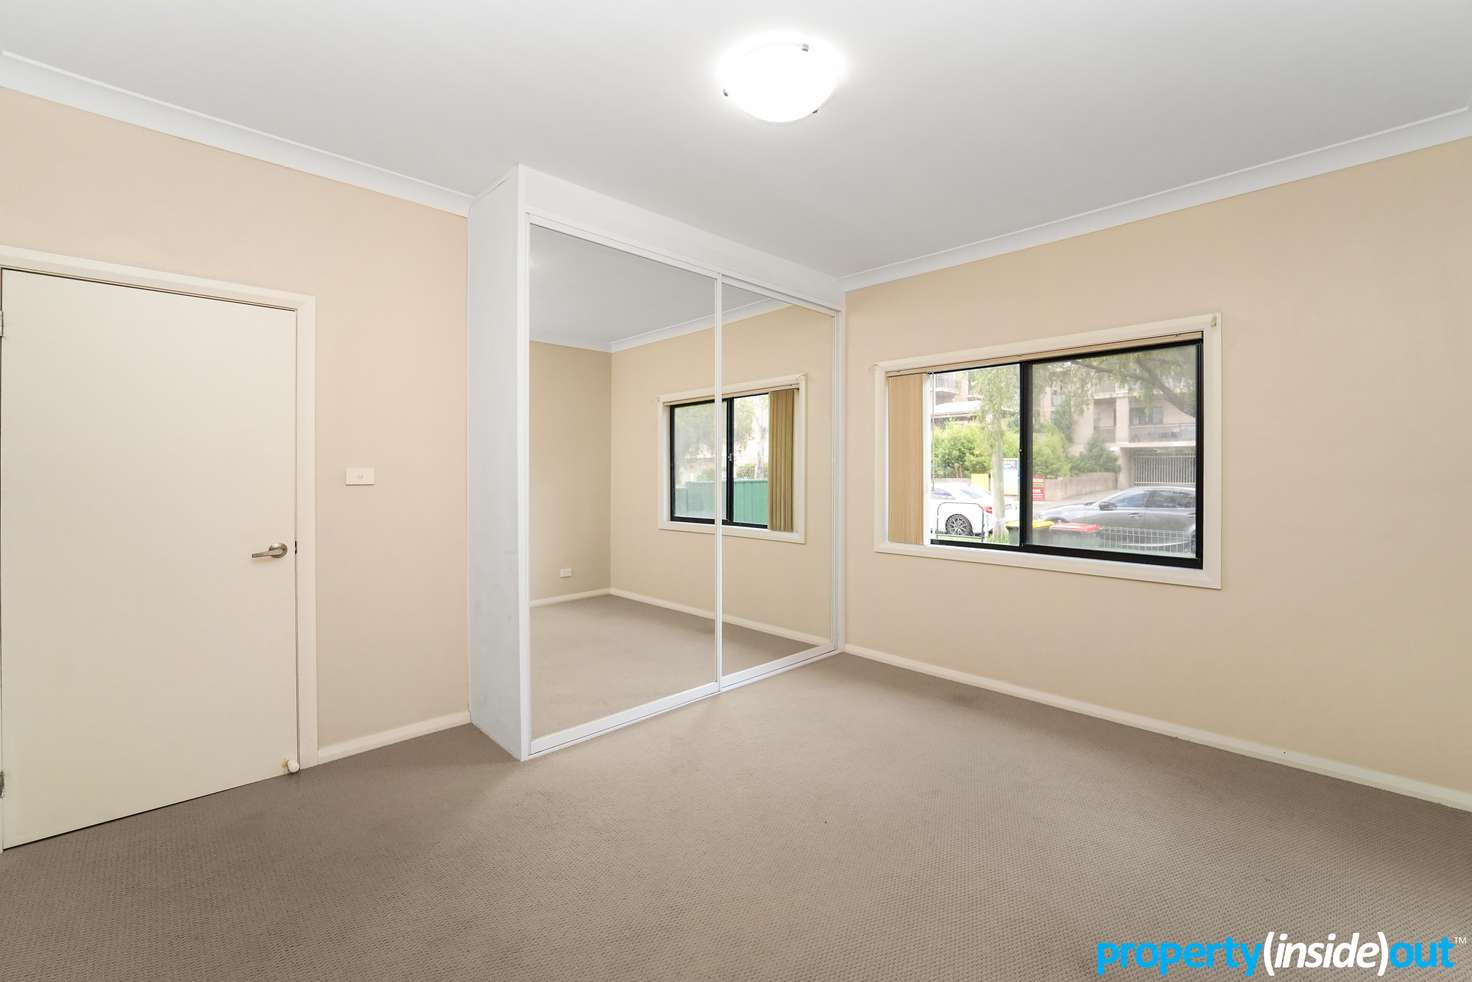 Main view of Homely house listing, 8 Durham St, Mount Druitt NSW 2770